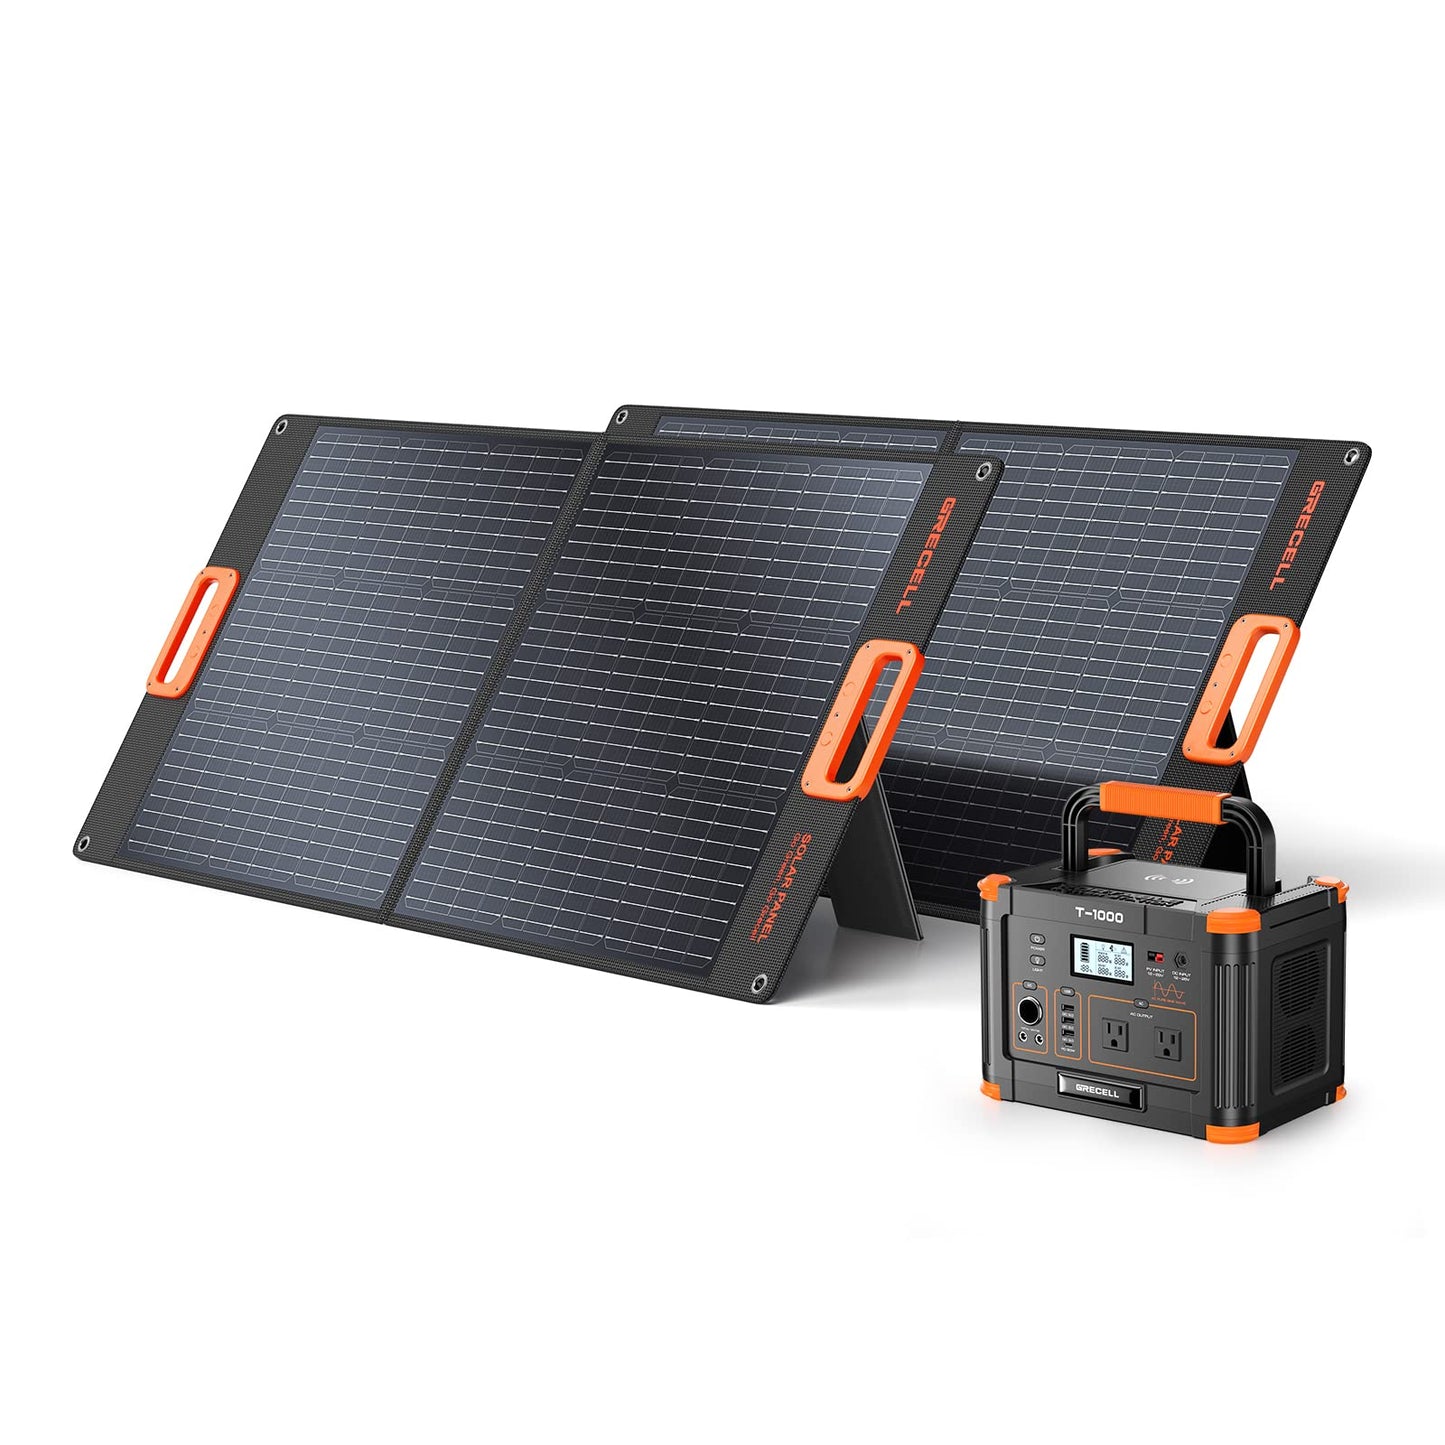 GRECELL Portable Power Station 1000W - GRECELL